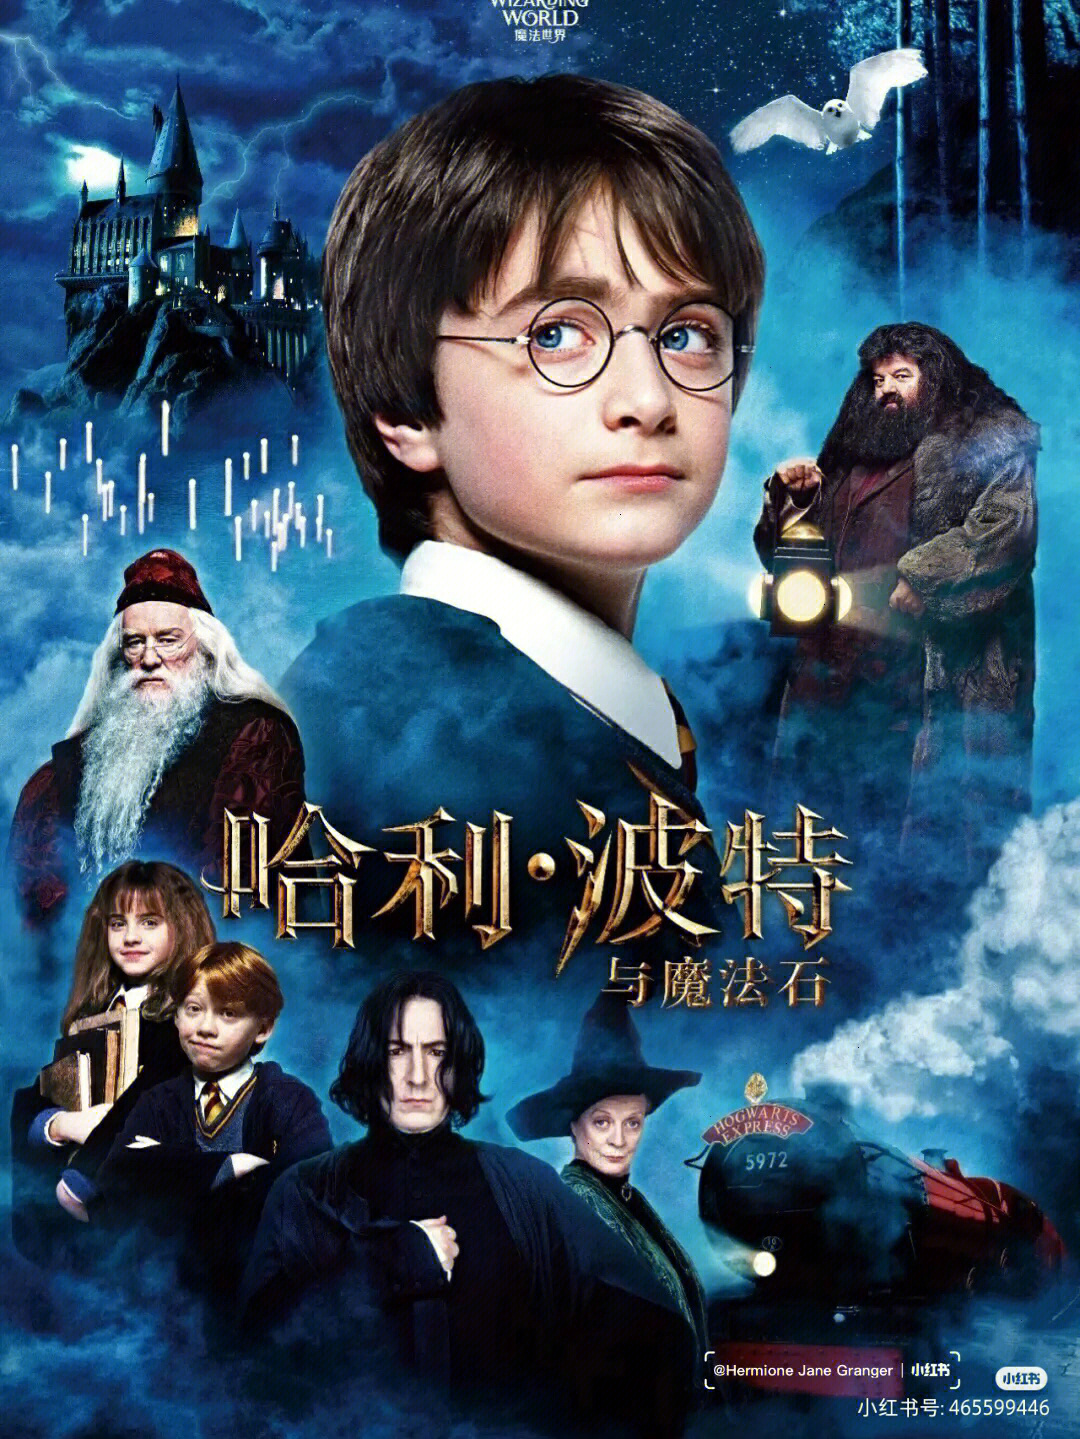 Harry Potter game Chinese version_Harry Potter game Chinese version_Harry Potter game Chinese version